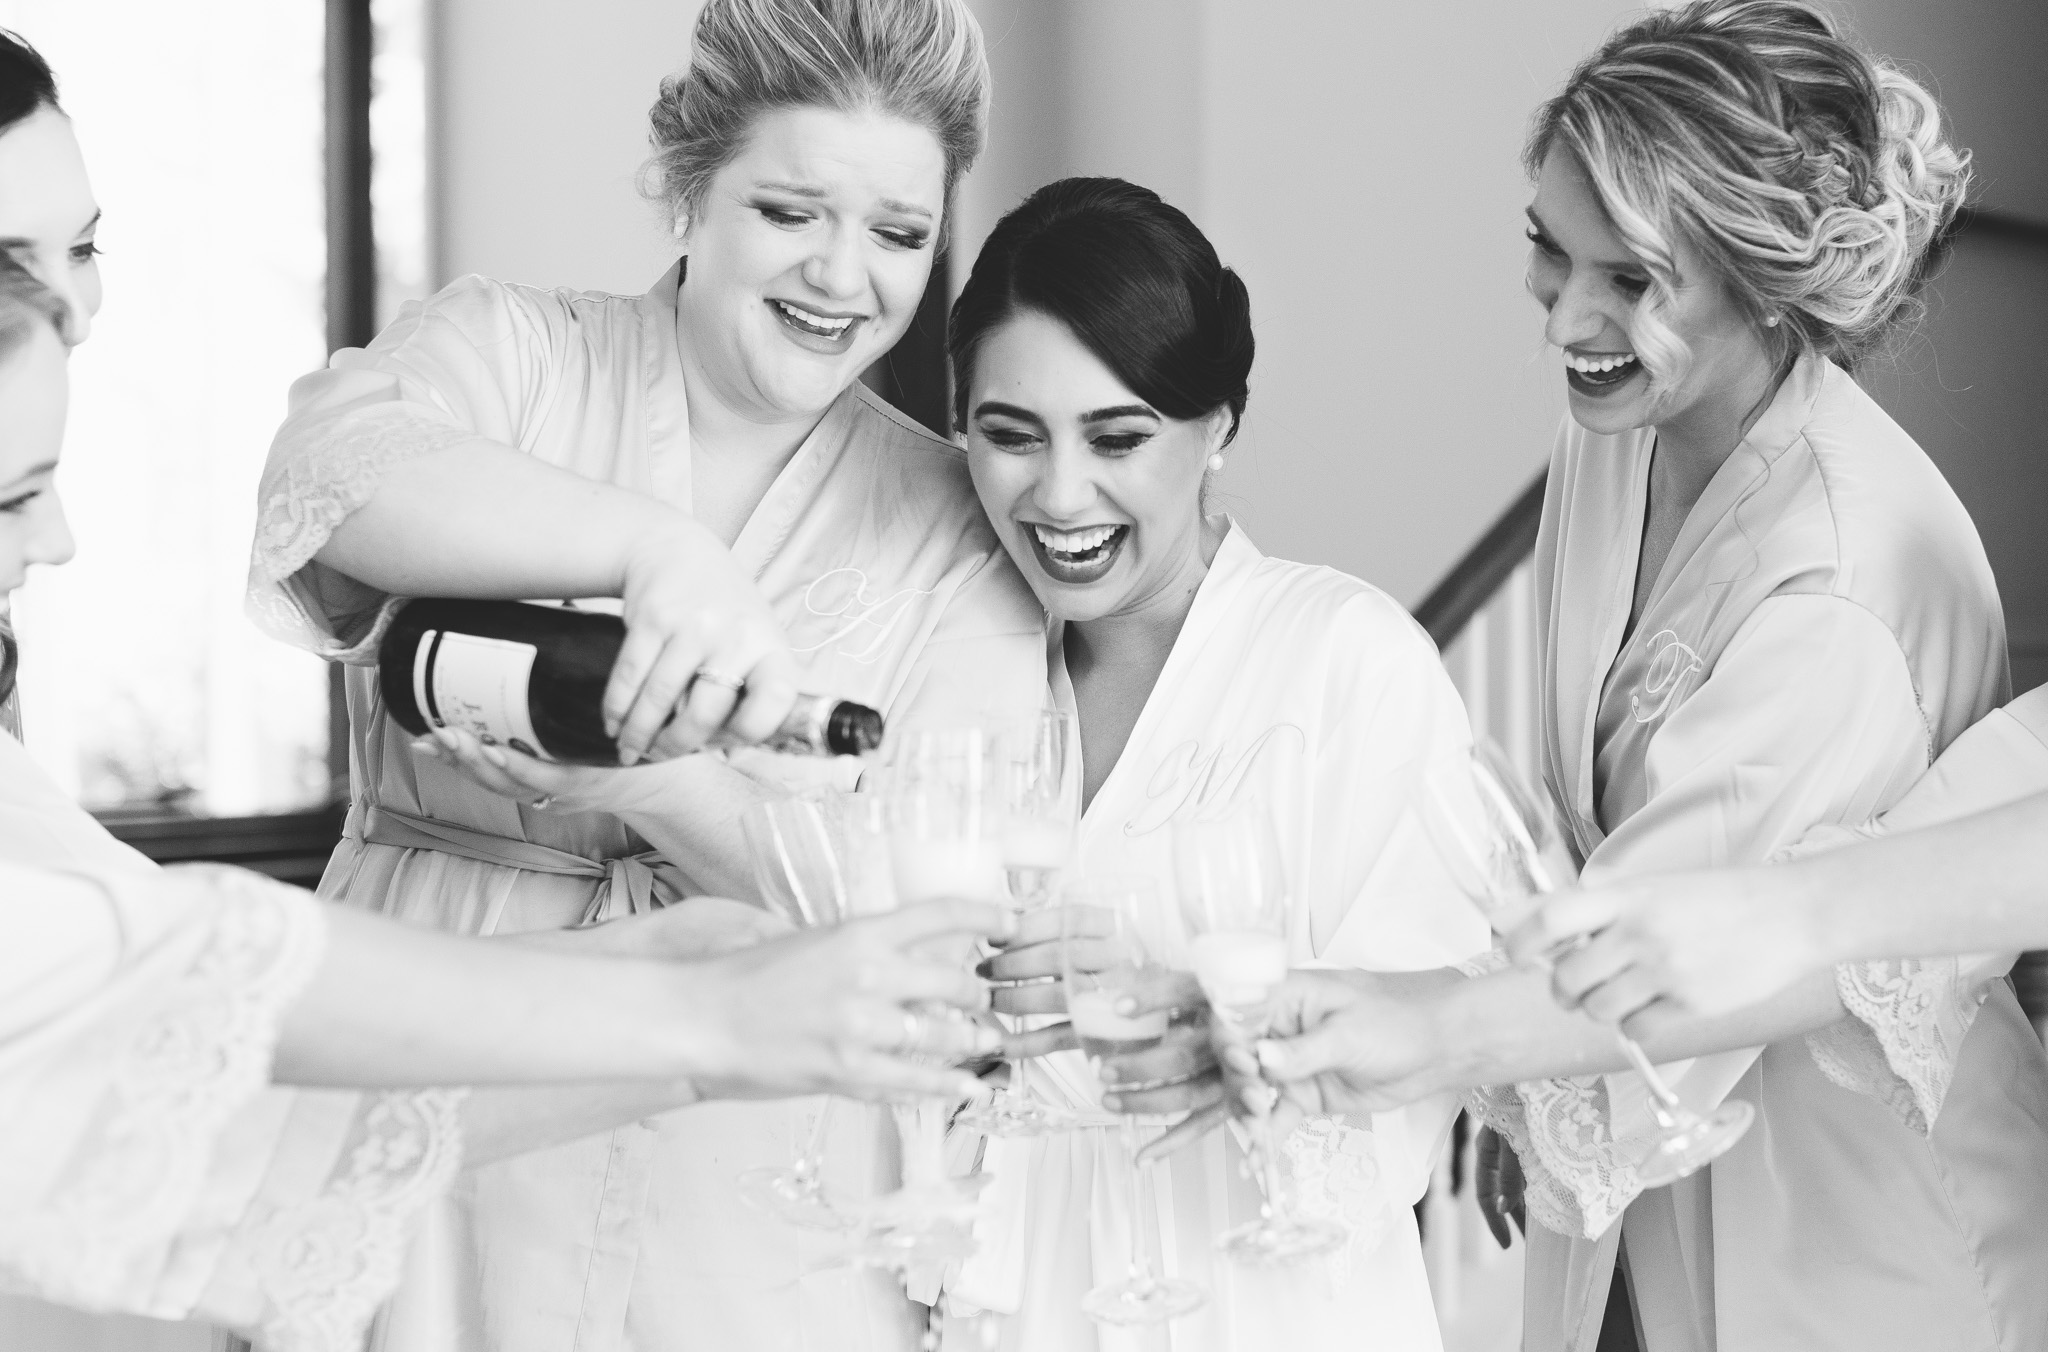 Nothing better than a toast with friends to celebrate your wedding day! Capture by Rebecca Cerasani, luxury wedding photographer.